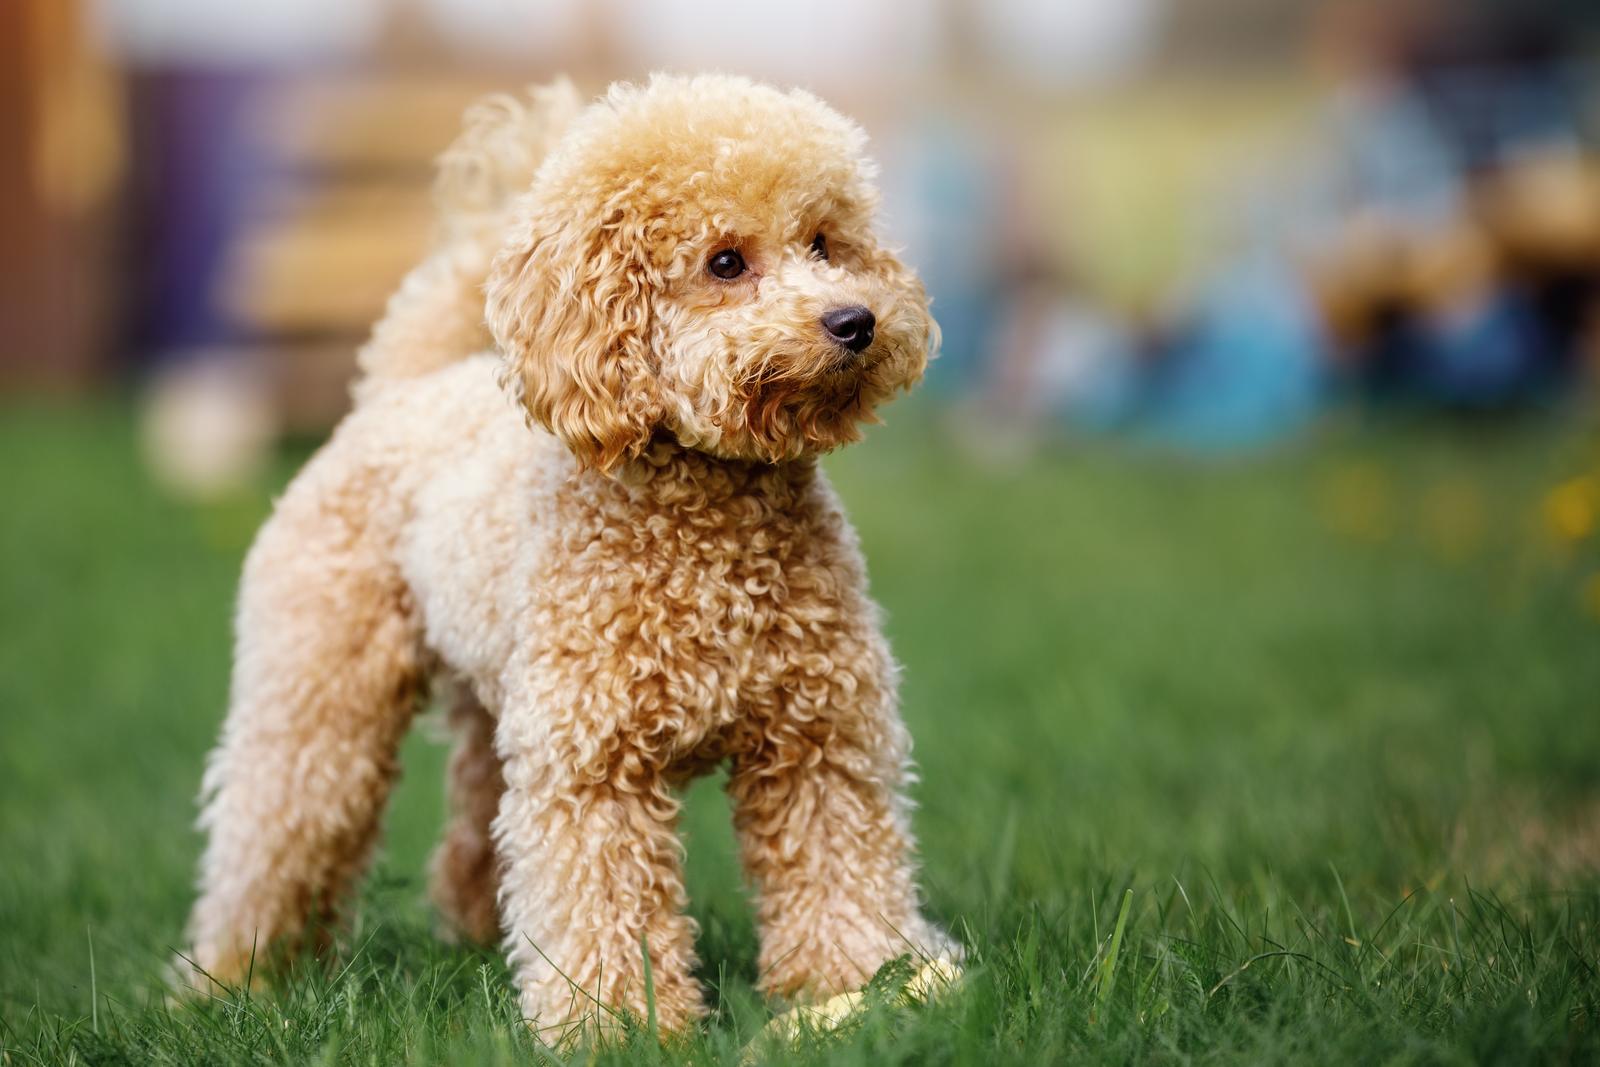 How short can i trim a poodle?